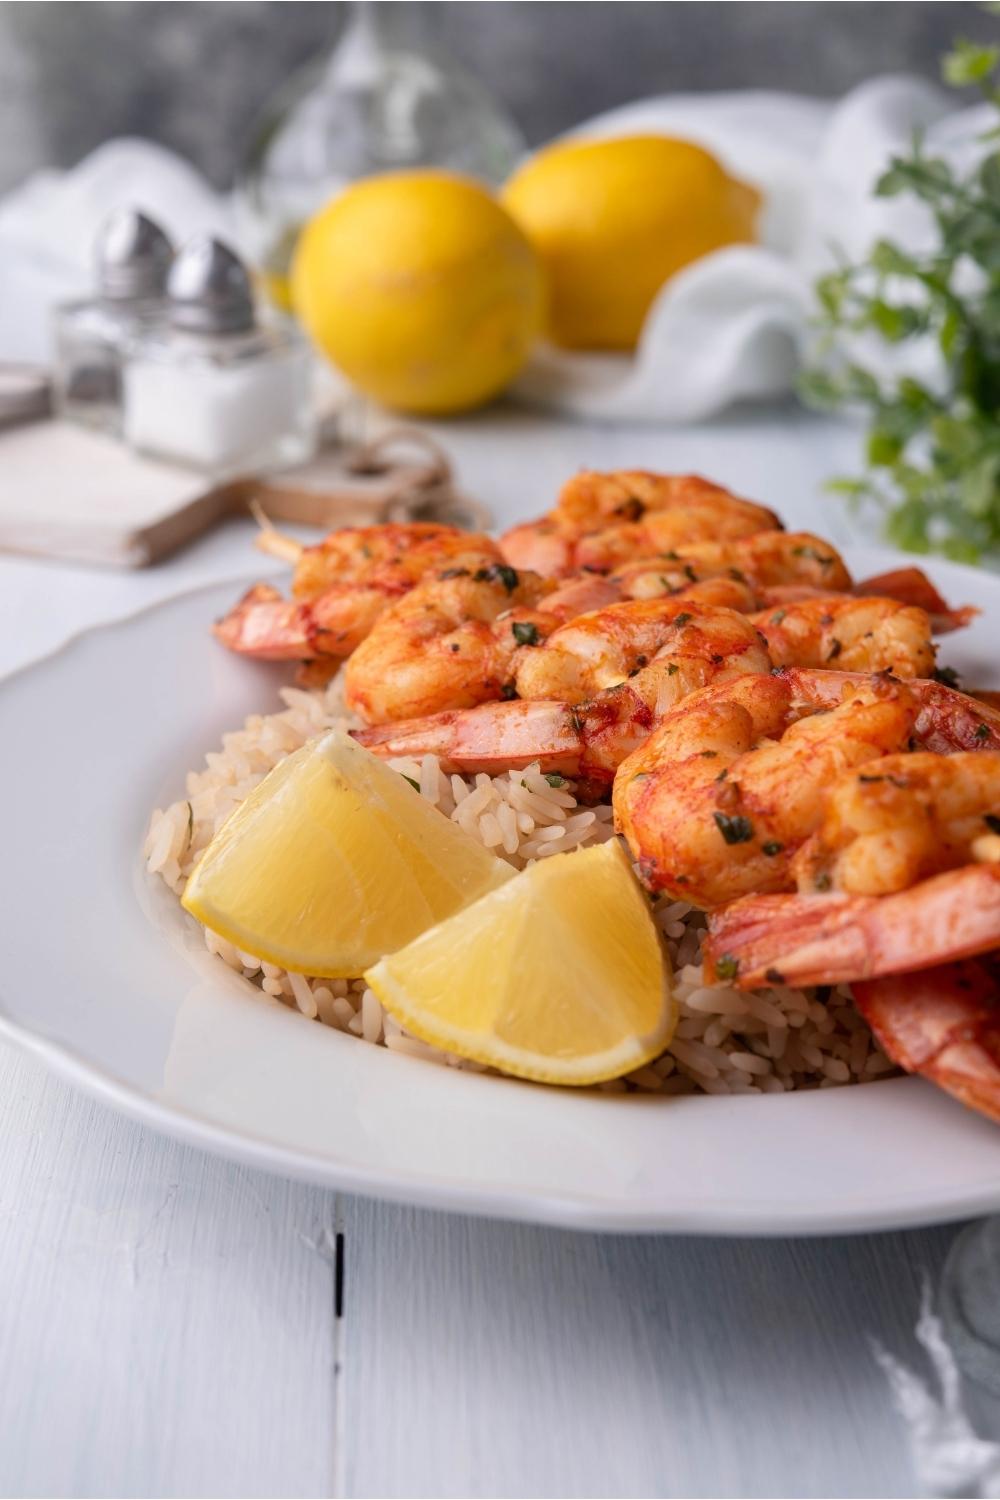 Texas Roadhouse grilled shrimp served over rice with lemon wedges, on a white plate with lemons in the background.